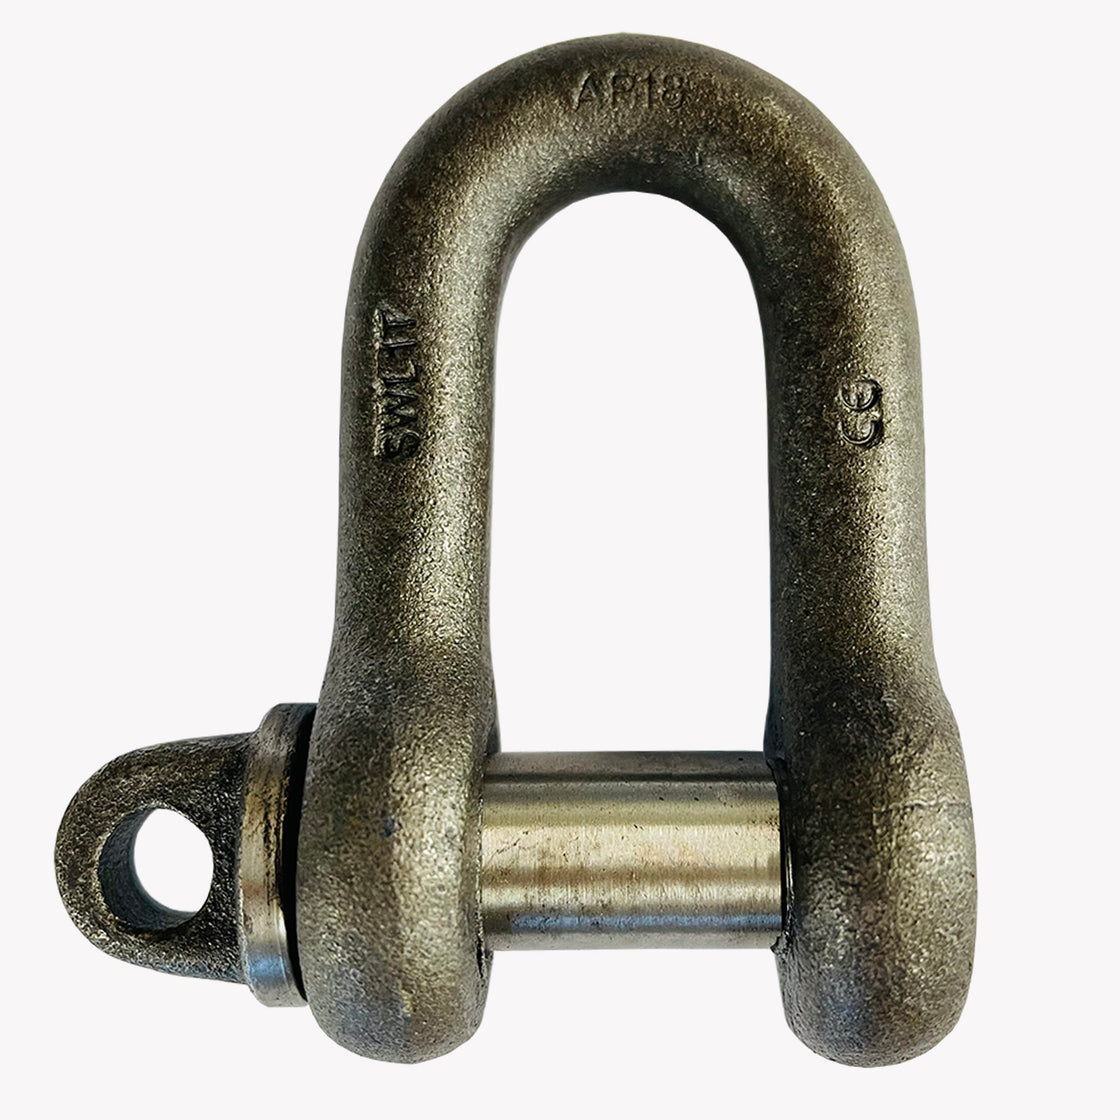 BS3032 LARGE DEE SHACKLE - BRITISH STANDARD (TABLE 2) - PGS Supplies 21 Ltd